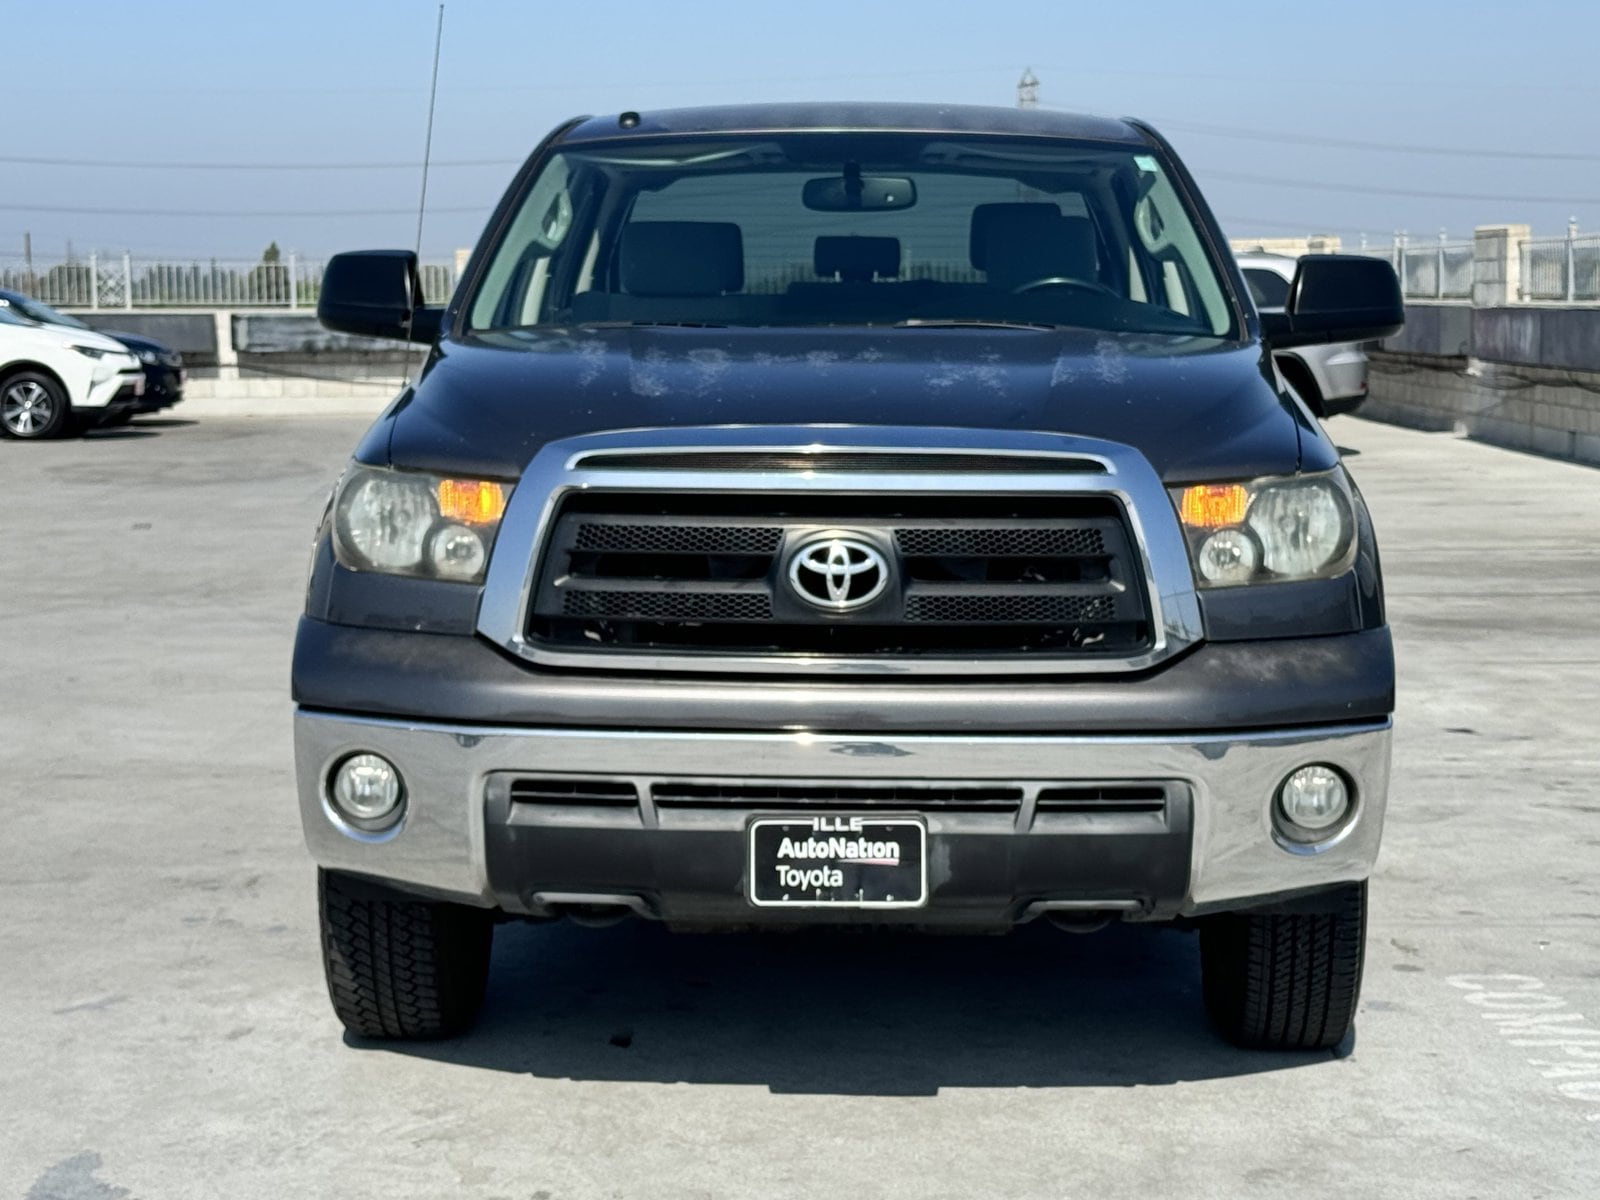 Used 2011 Toyota Tundra Tundra Grade with VIN 5TFEY5F12BX100512 for sale in Cerritos, CA